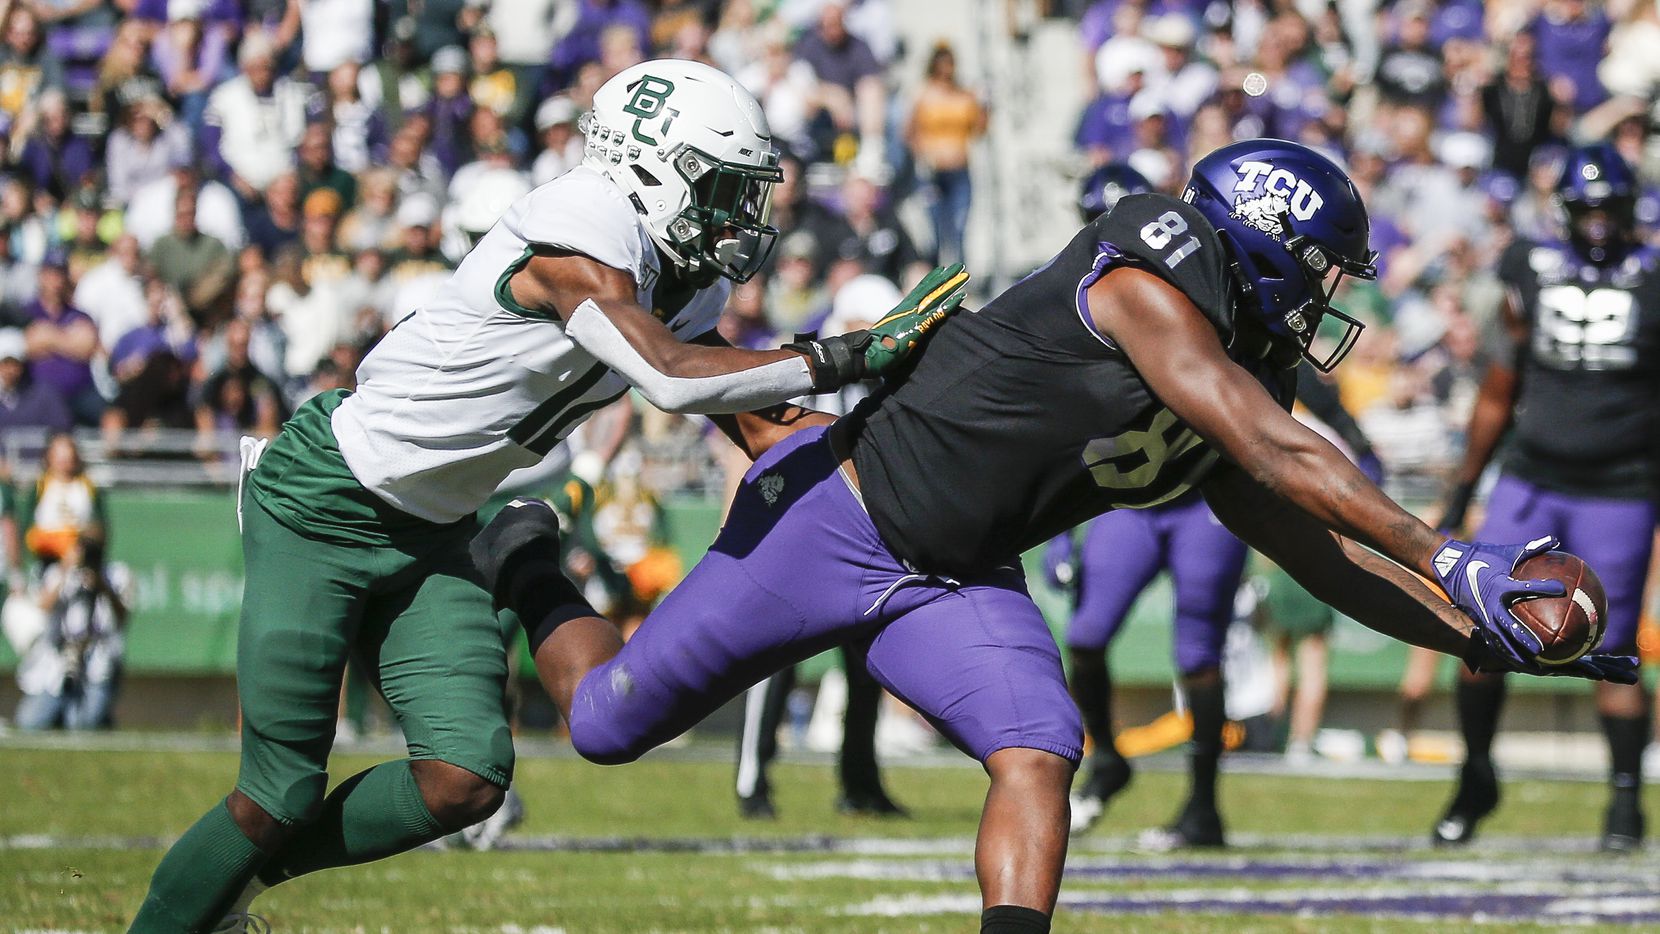 TCU Horned Frogs tight end Pro Wells (81) receives a pass as Baylor Bears cornerback Kalon Barnes (12) defends during the first half of an NCAA football matchup between the Texas Christian University Horned Frogs and the Baylor Bears at Amon G. Carter Stadium in Fort Worth, Texas, on Saturday, No. 9, 2019.